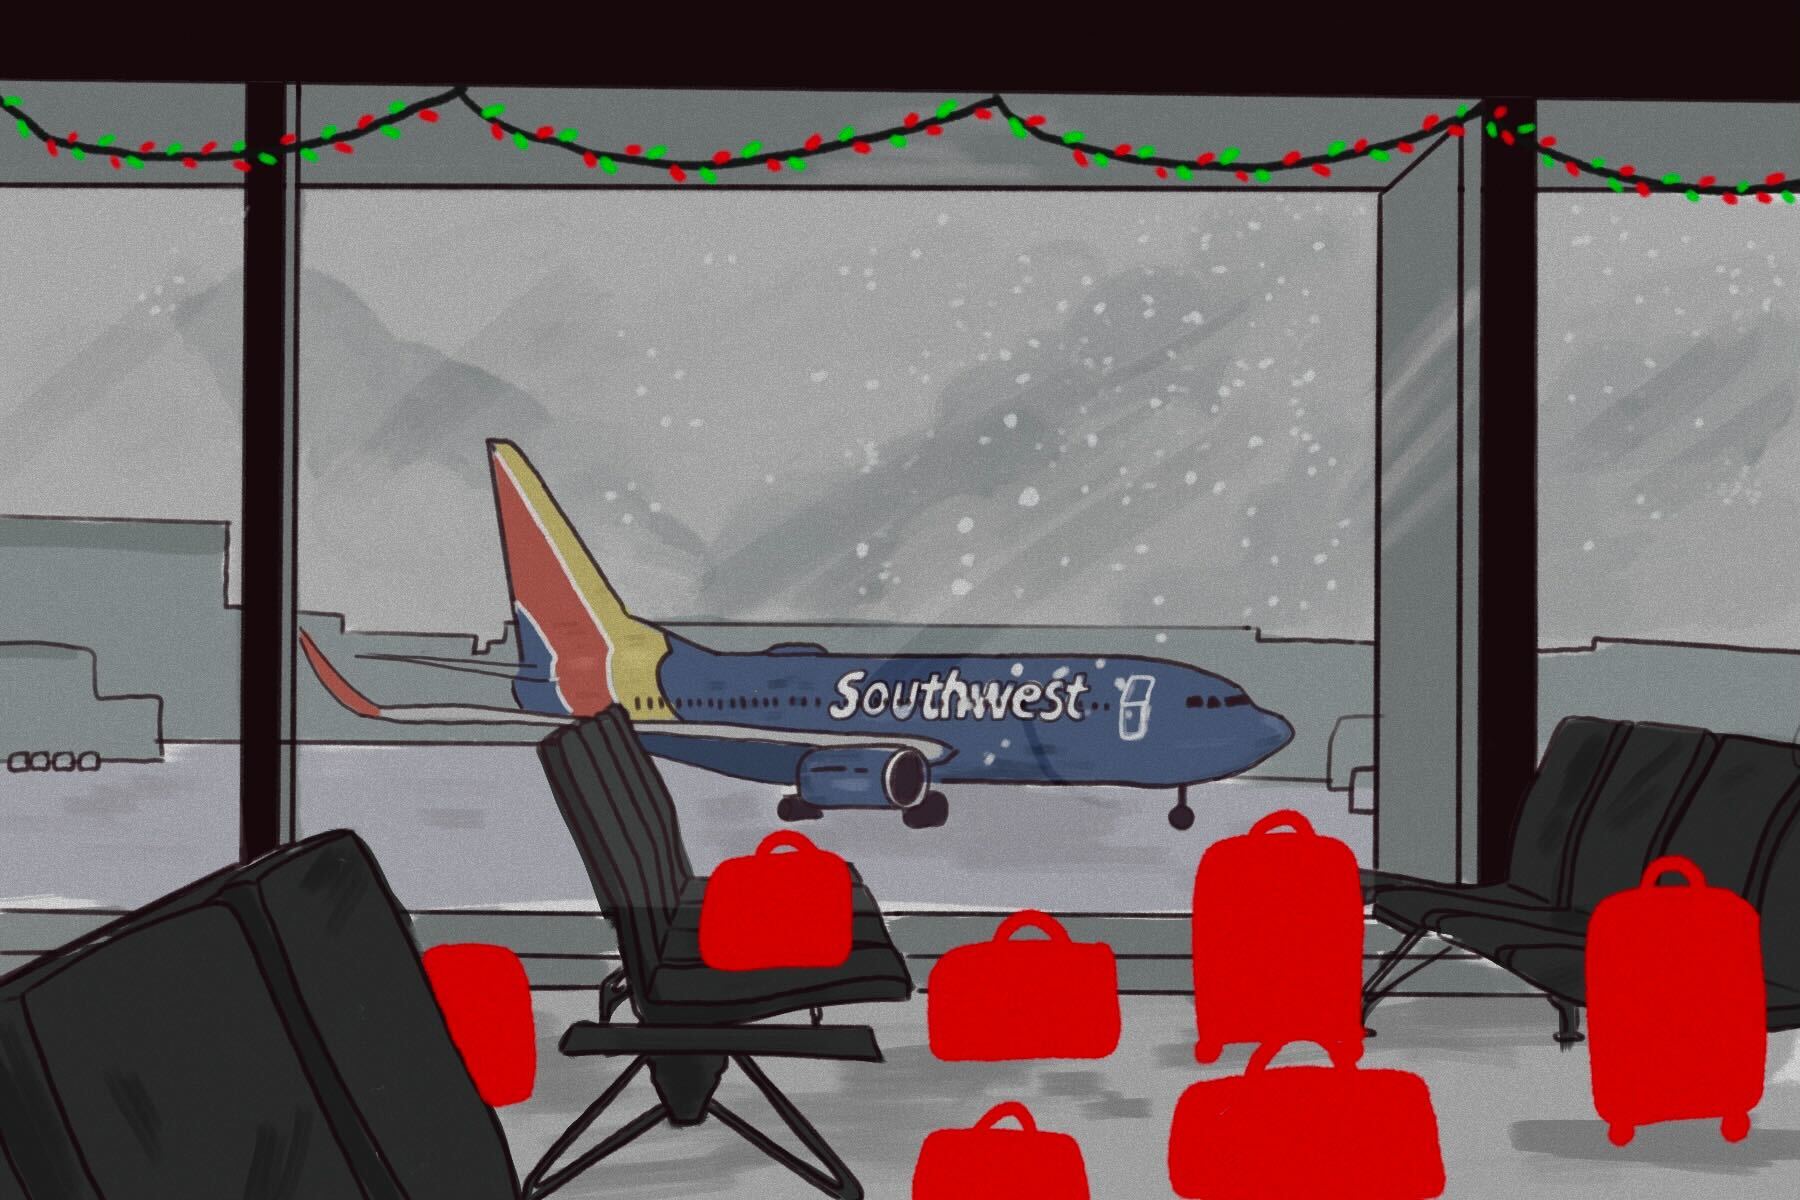 In an article about Southwest Airlines, a Southwest plane can be seen through the window of an airport filled with. lost luggage.